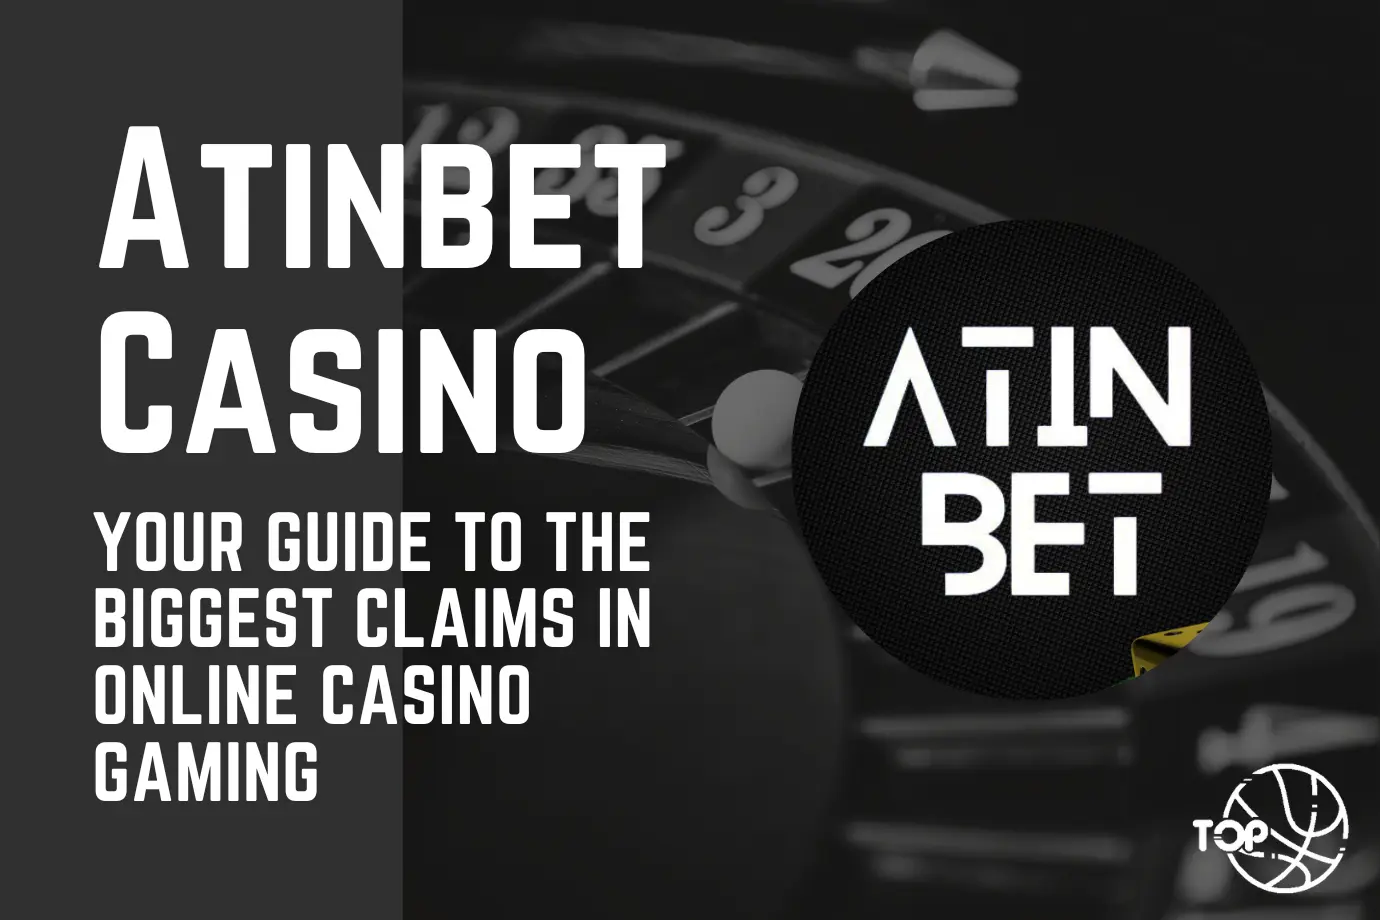 Atinbet: Your Guide to the Biggest Claims in Online Casino Gaming